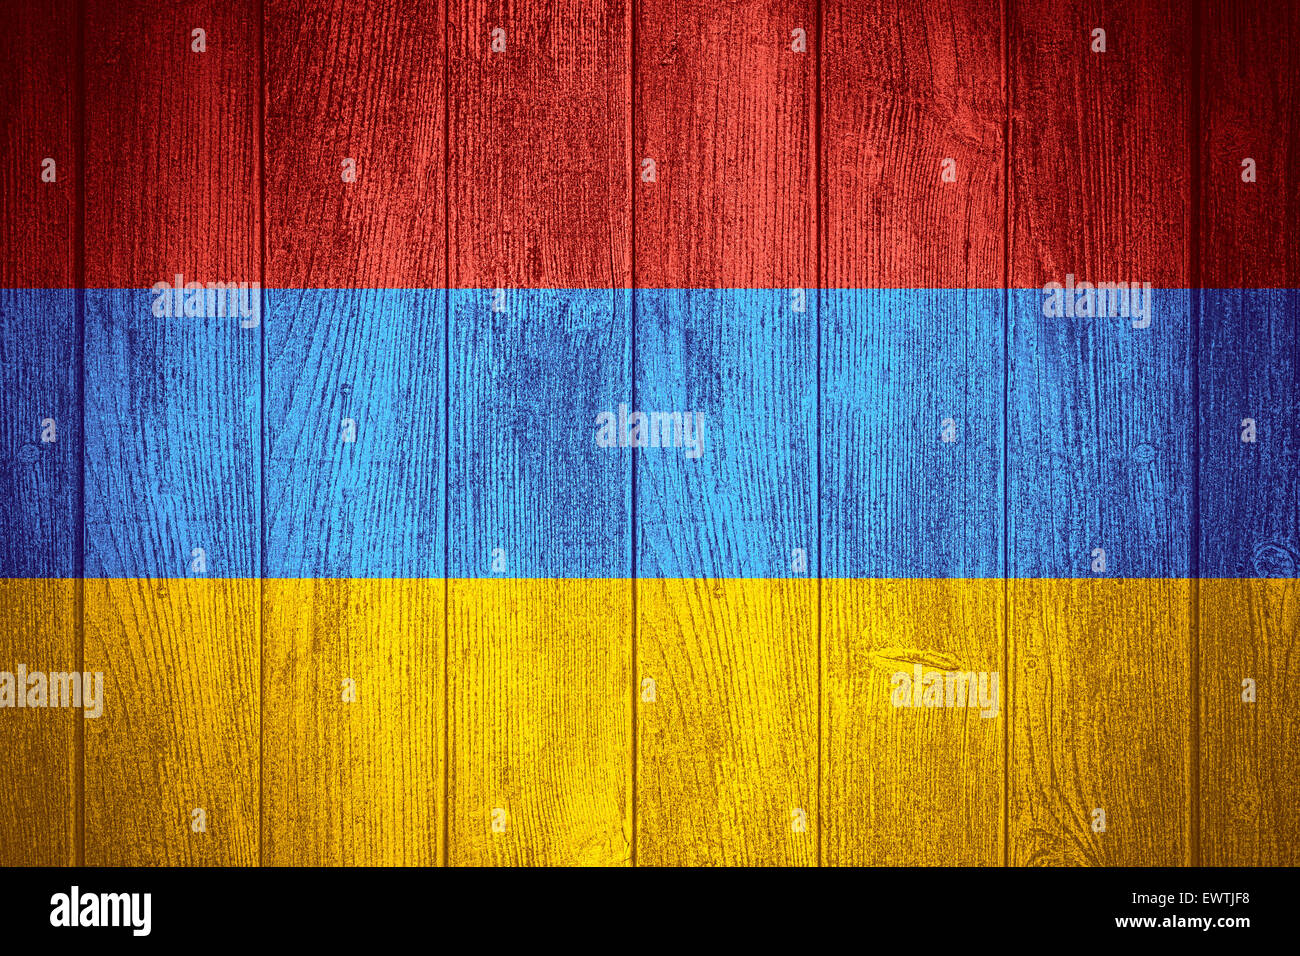 Armenia flag or Armenian banner on wooden boards background Stock Photo